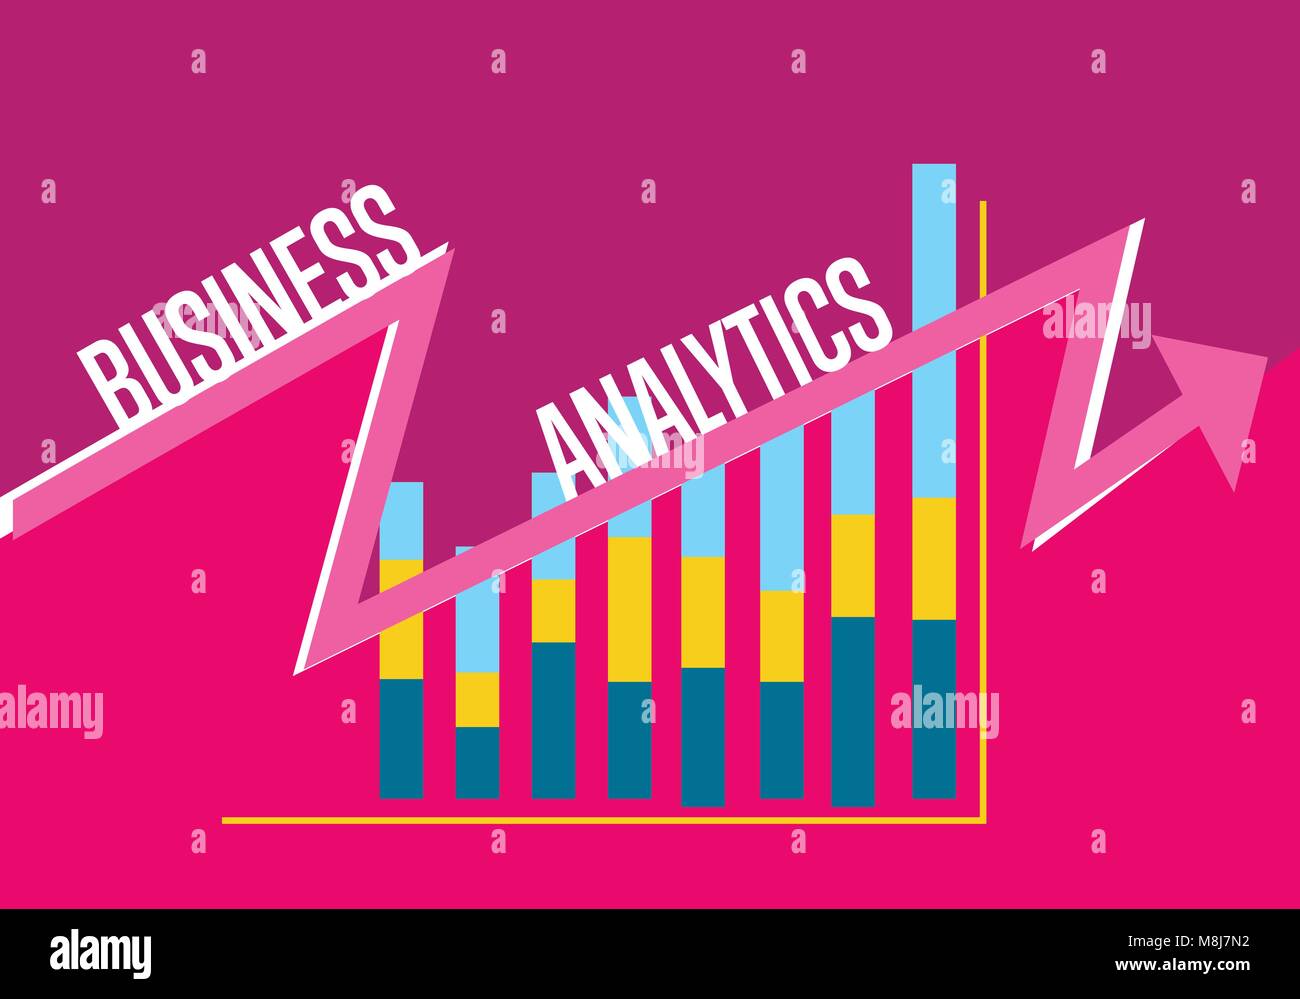 Business analytics banner with graphic report Stock Vector